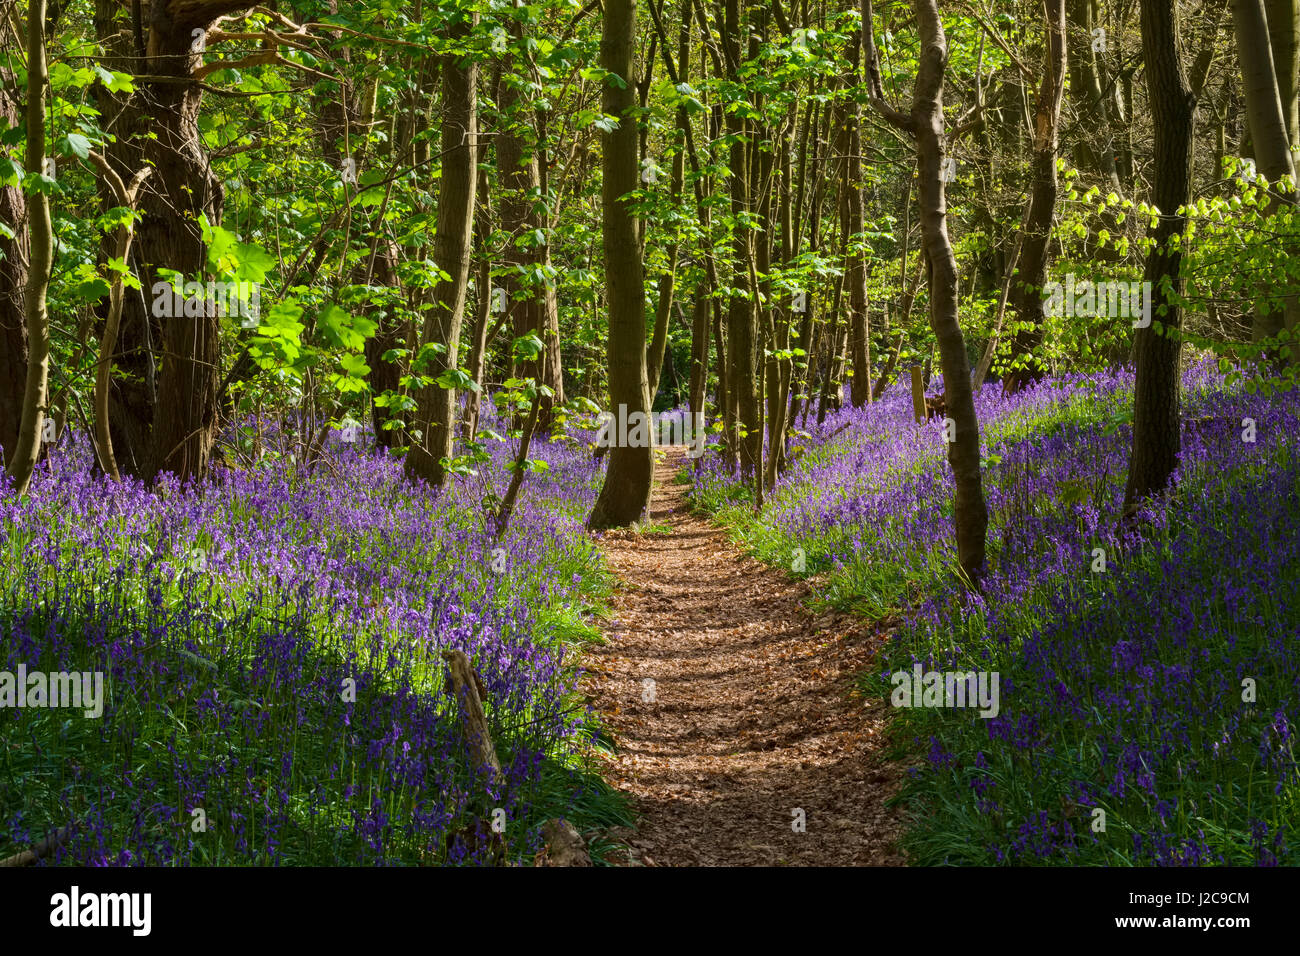 Bluebells growing in Chempsill Coppice at Worfield, Shropshire, England, UK Stock Photo